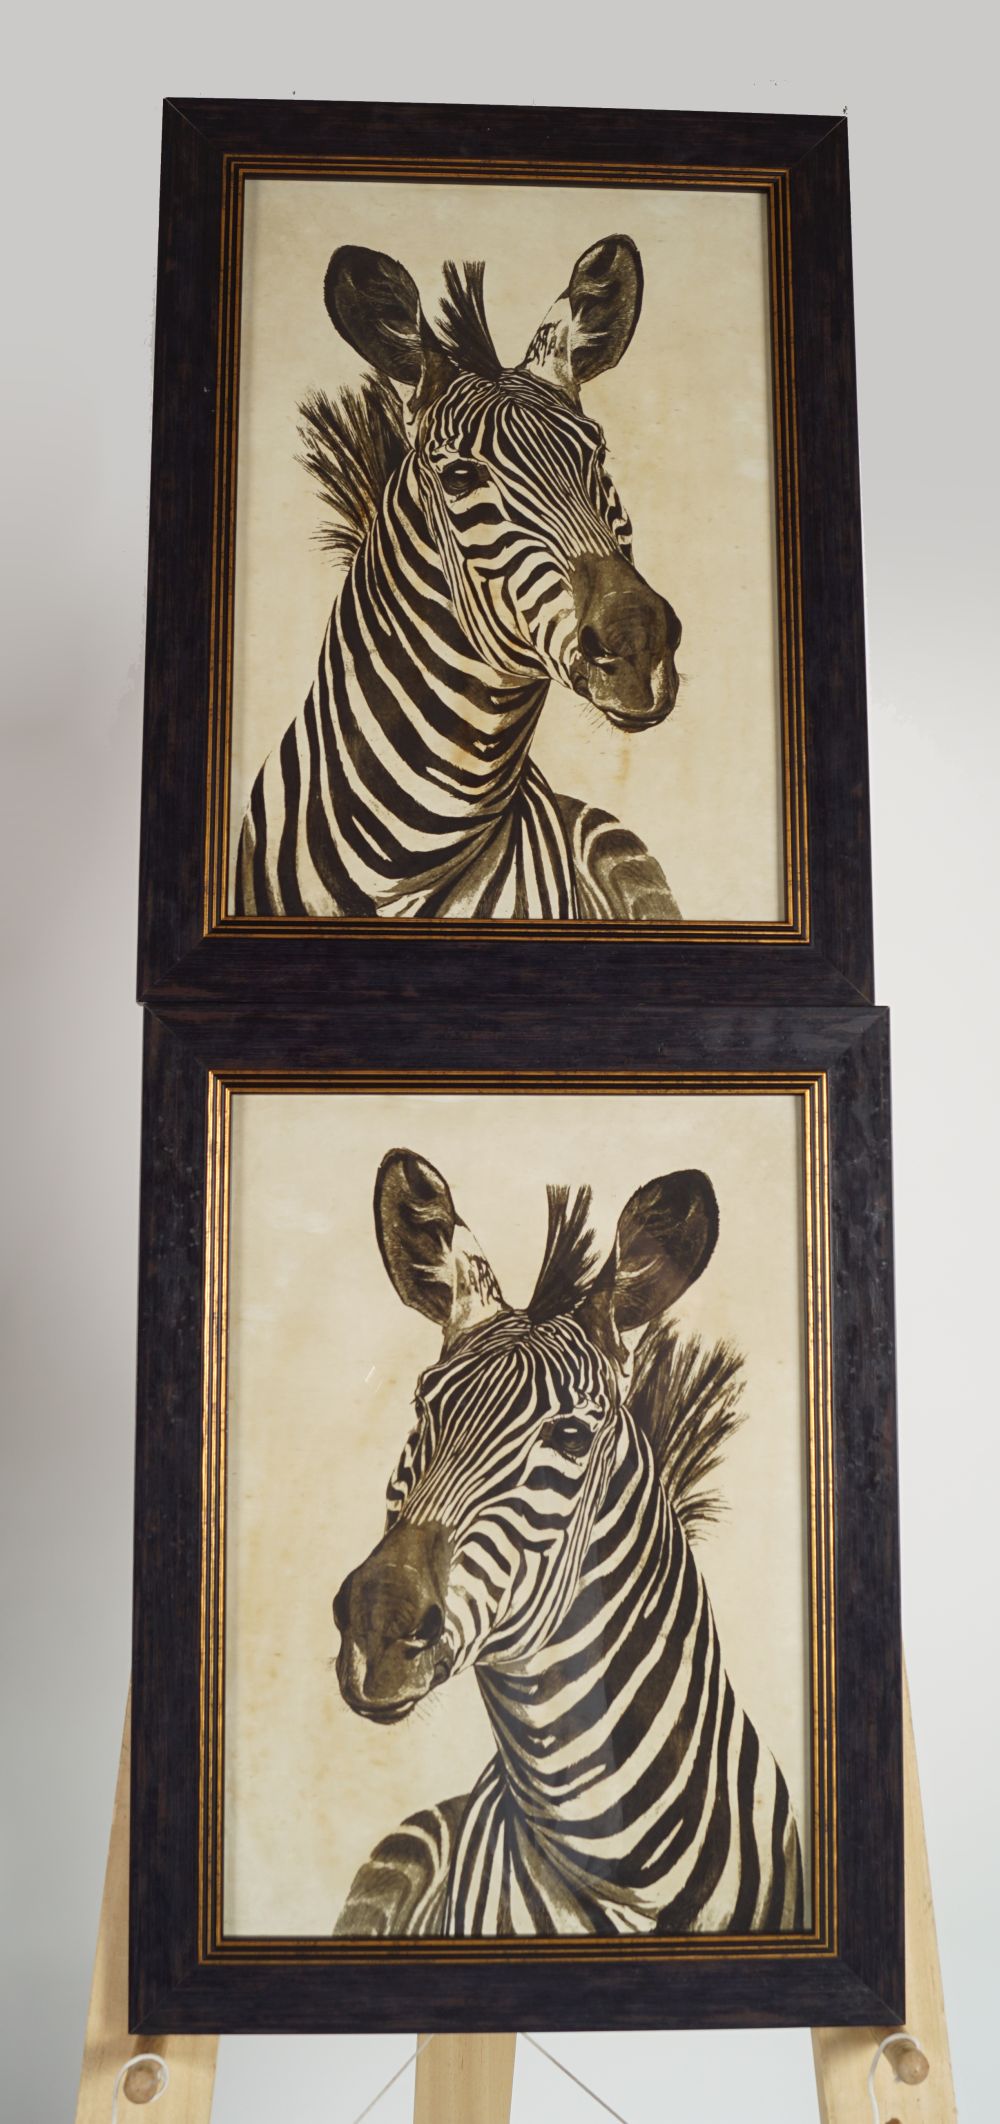 PAIR OF ZOOLOGICAL PRINTS - Image 2 of 2